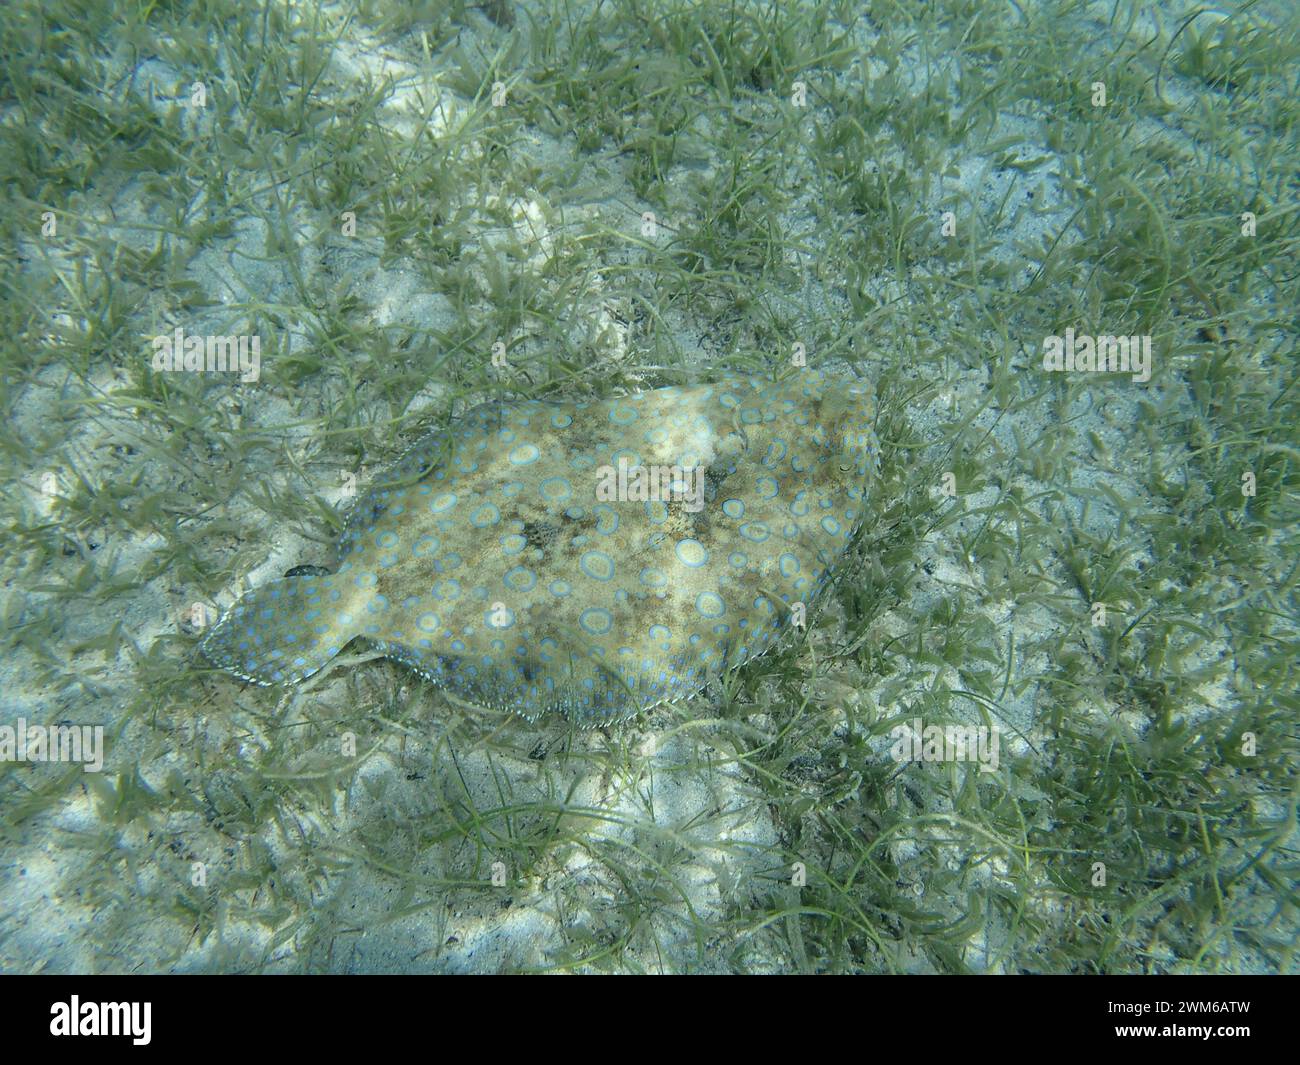 A peacock Flounder camouflages itself on the grassy seafloor Stock Photo